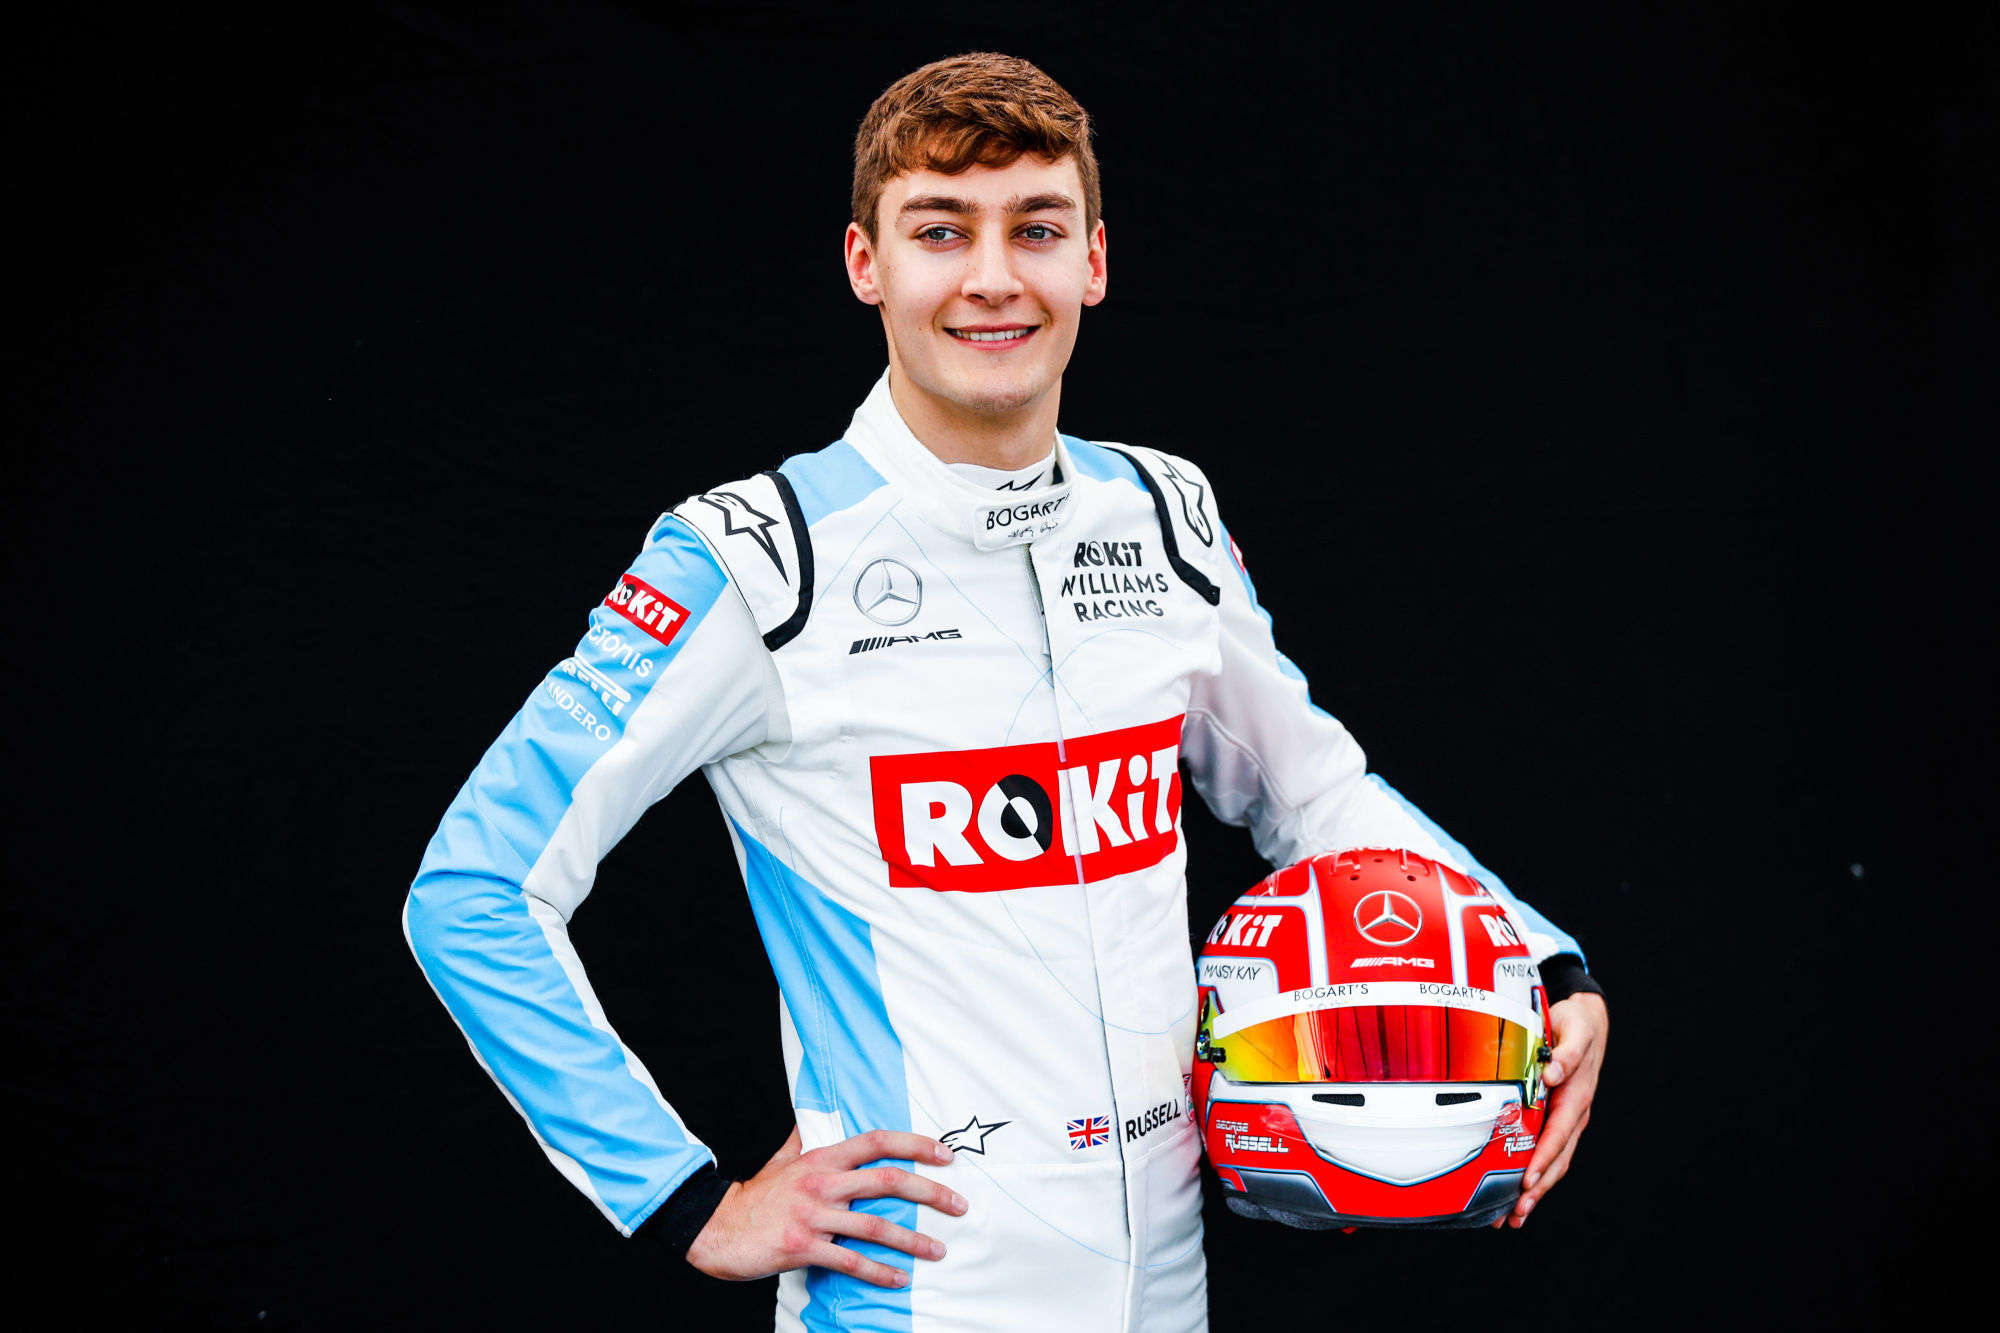 George Russell (GBR, ROKiT Williams Racing)
Photo by Icon Sport